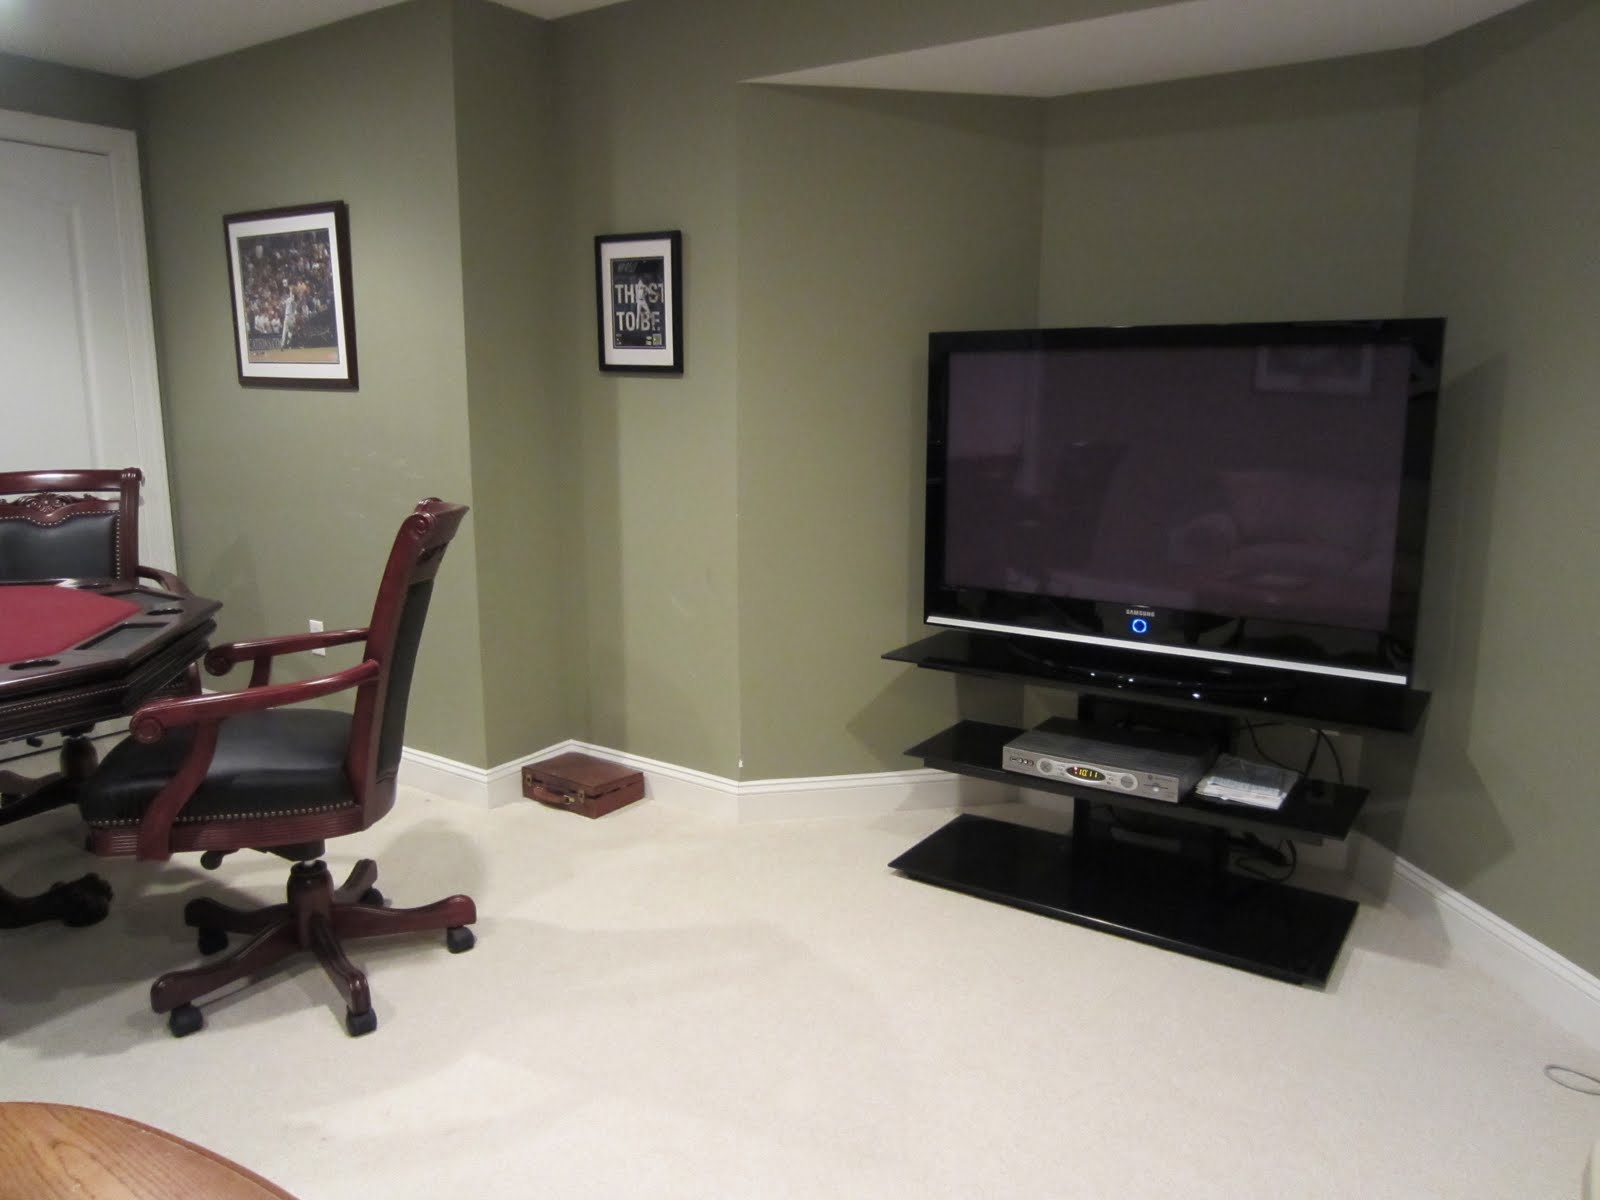 Man Cave Essentials - a Large Screen TV of course!